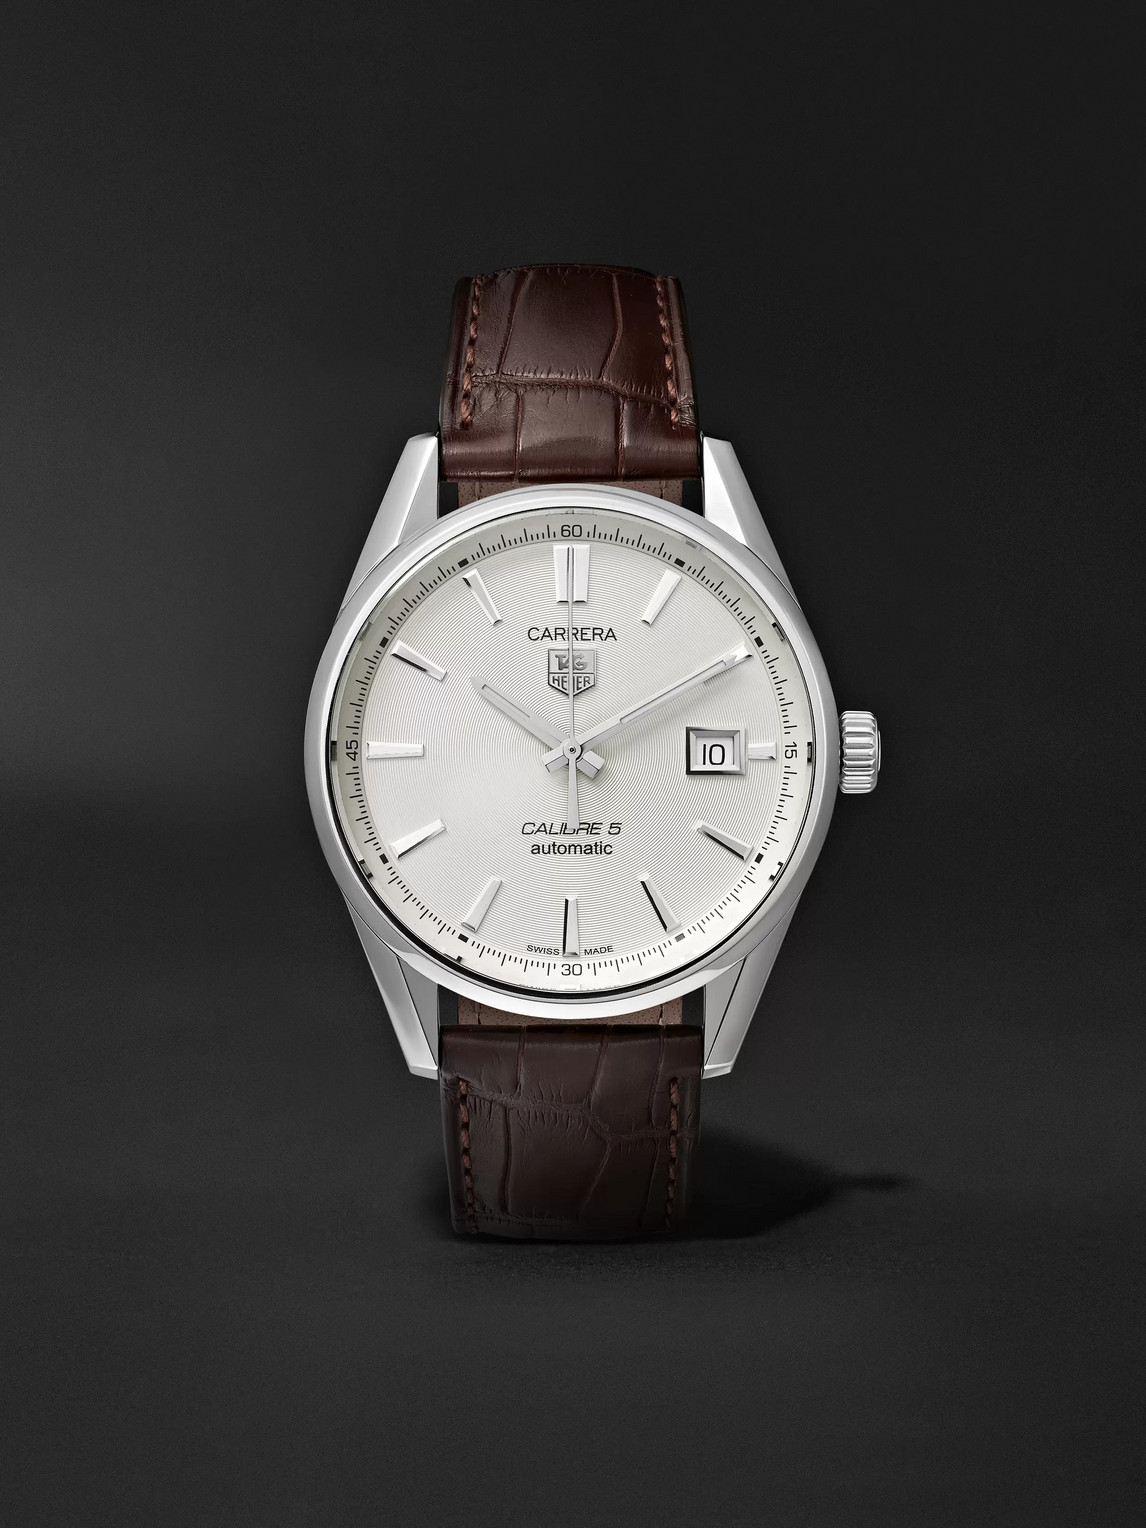 Tag Heuer Carrera Automatic 39mm Steel And Alligator Watch, Ref. No. War211b.fc6181 In White/brown